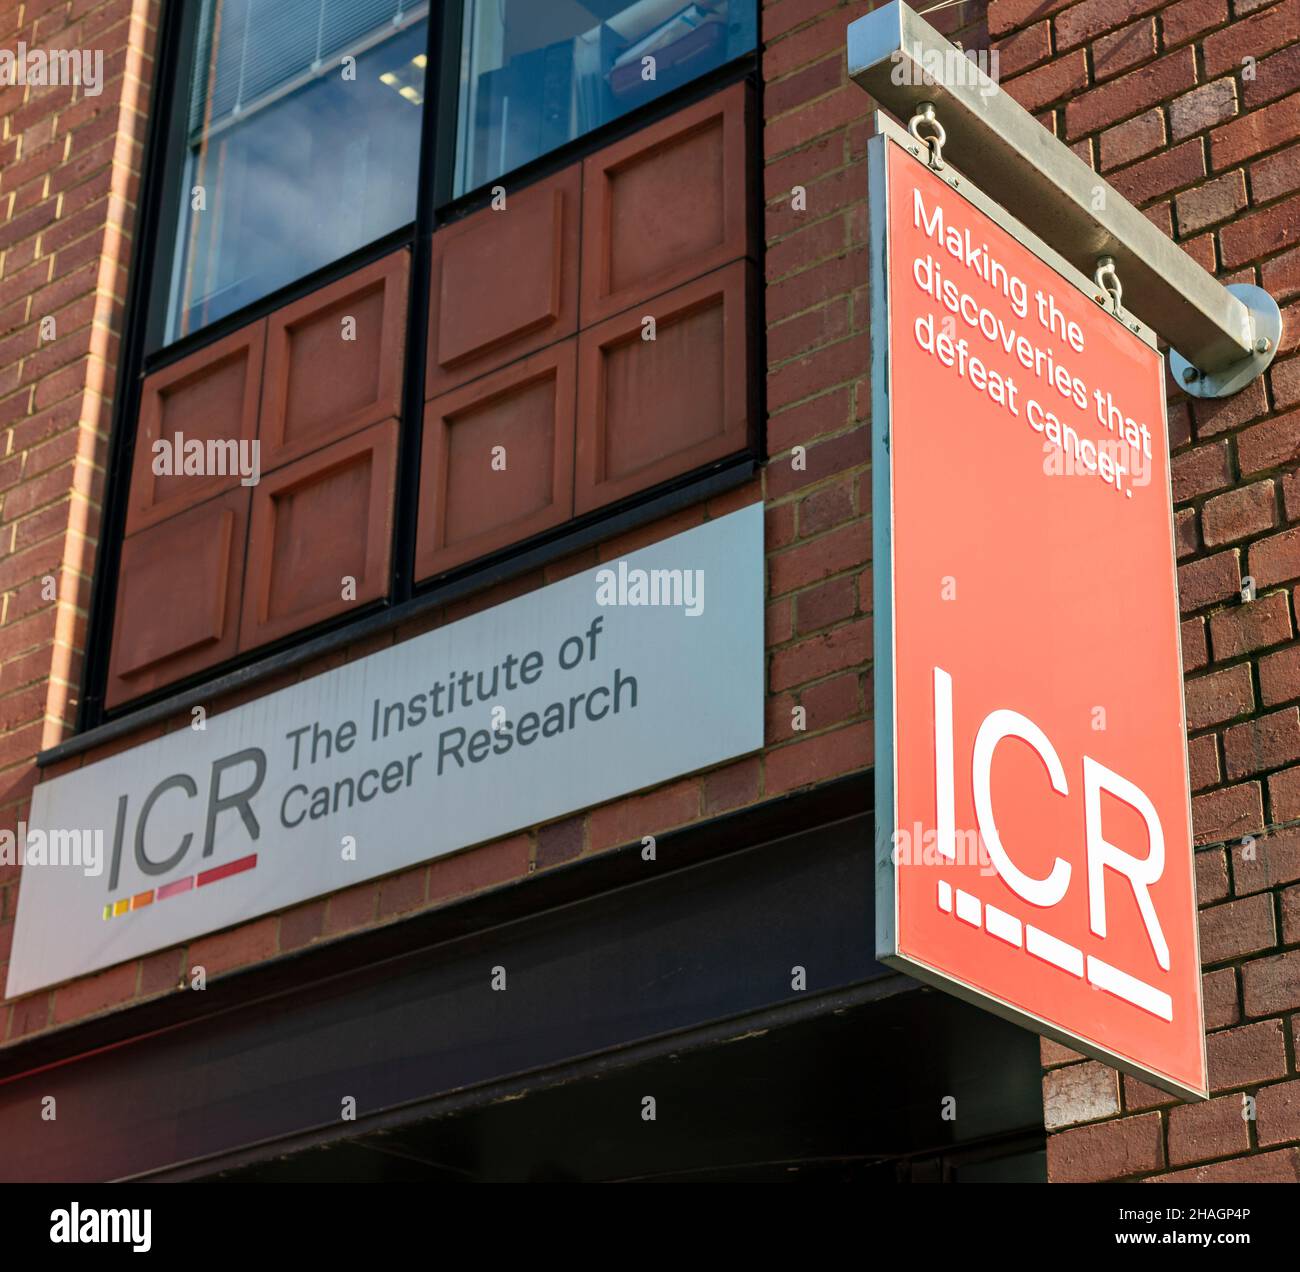 The Institute of Cancer Research (ICR), Old Brompton Road, Kensington, London Stock Photo